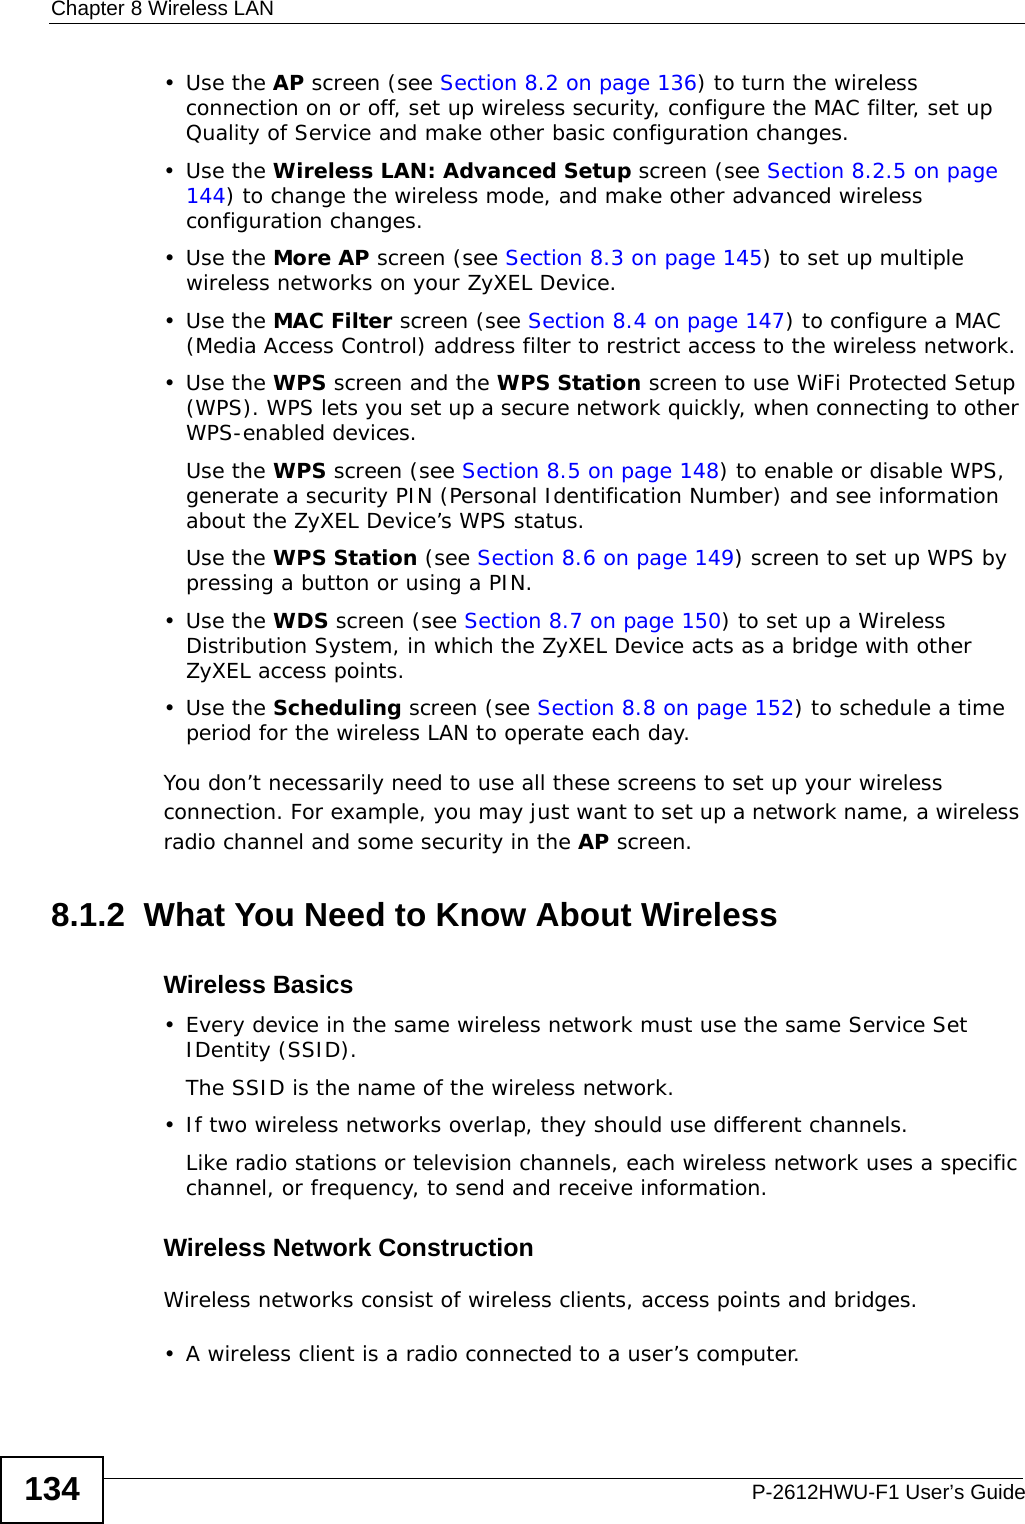 Chapter 8 Wireless LANP-2612HWU-F1 User’s Guide134•Use the AP screen (see Section 8.2 on page 136) to turn the wireless connection on or off, set up wireless security, configure the MAC filter, set up Quality of Service and make other basic configuration changes.•Use the Wireless LAN: Advanced Setup screen (see Section 8.2.5 on page 144) to change the wireless mode, and make other advanced wireless configuration changes.•Use the More AP screen (see Section 8.3 on page 145) to set up multiple wireless networks on your ZyXEL Device.•Use the MAC Filter screen (see Section 8.4 on page 147) to configure a MAC (Media Access Control) address filter to restrict access to the wireless network.•Use the WPS screen and the WPS Station screen to use WiFi Protected Setup (WPS). WPS lets you set up a secure network quickly, when connecting to other WPS-enabled devices. Use the WPS screen (see Section 8.5 on page 148) to enable or disable WPS, generate a security PIN (Personal Identification Number) and see information about the ZyXEL Device’s WPS status.Use the WPS Station (see Section 8.6 on page 149) screen to set up WPS by pressing a button or using a PIN.•Use the WDS screen (see Section 8.7 on page 150) to set up a Wireless Distribution System, in which the ZyXEL Device acts as a bridge with other ZyXEL access points.•Use the Scheduling screen (see Section 8.8 on page 152) to schedule a time period for the wireless LAN to operate each day.You don’t necessarily need to use all these screens to set up your wireless connection. For example, you may just want to set up a network name, a wireless radio channel and some security in the AP screen.8.1.2  What You Need to Know About WirelessWireless Basics• Every device in the same wireless network must use the same Service Set IDentity (SSID).The SSID is the name of the wireless network.• If two wireless networks overlap, they should use different channels.Like radio stations or television channels, each wireless network uses a specific channel, or frequency, to send and receive information.Wireless Network ConstructionWireless networks consist of wireless clients, access points and bridges. • A wireless client is a radio connected to a user’s computer. 